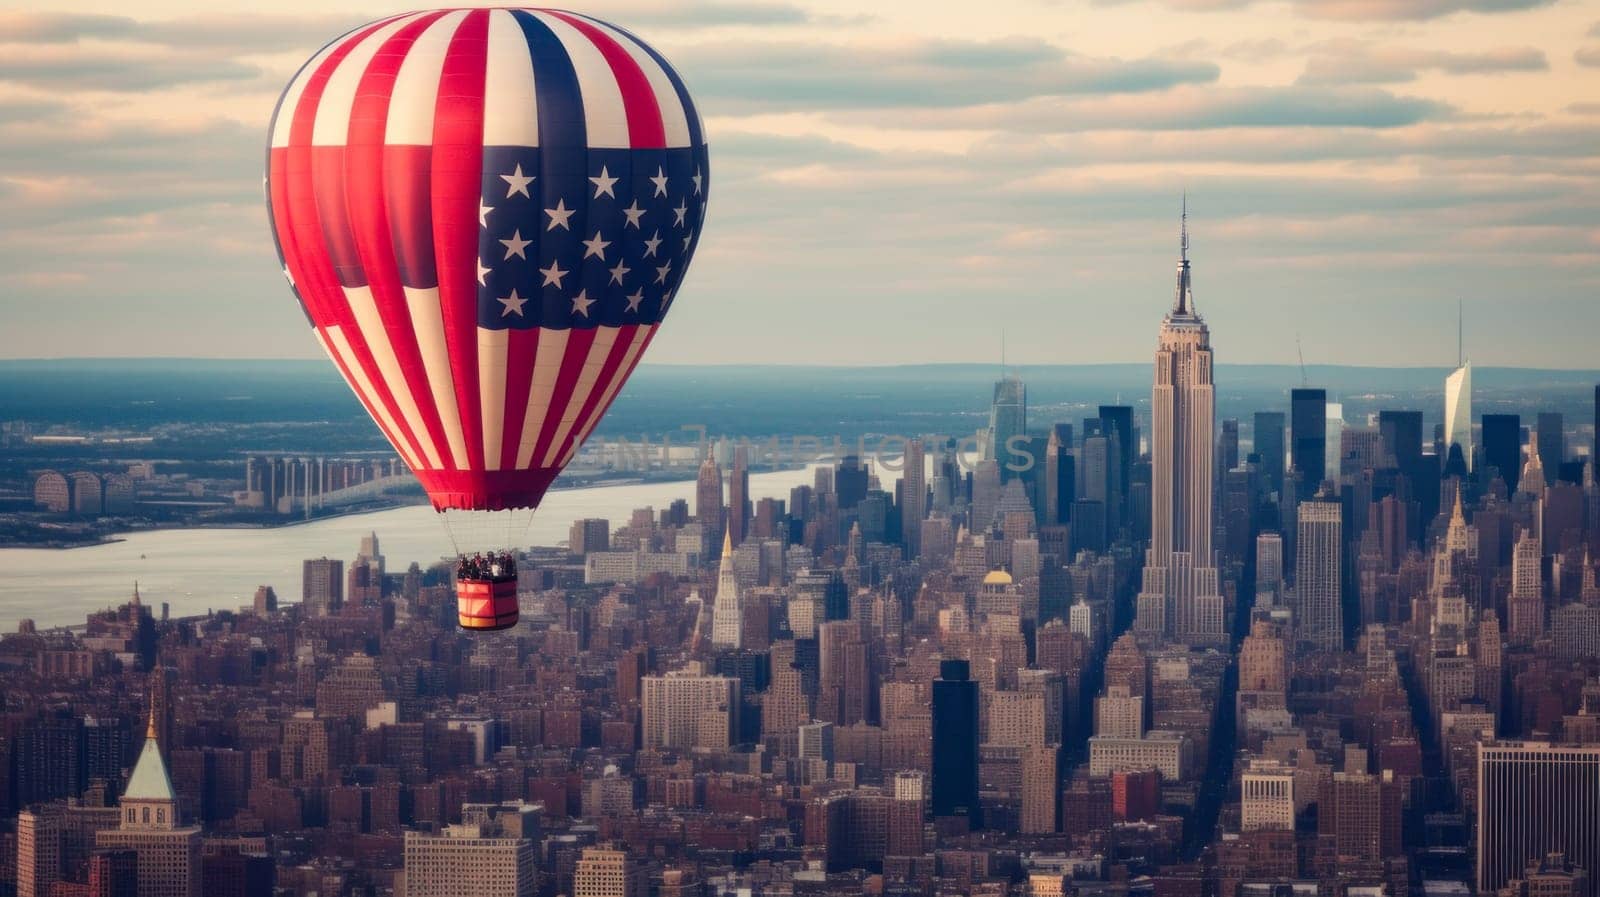 A hot air balloon, an airship flies over a big city in the colors of the flag of the United States of America. by Alla_Yurtayeva